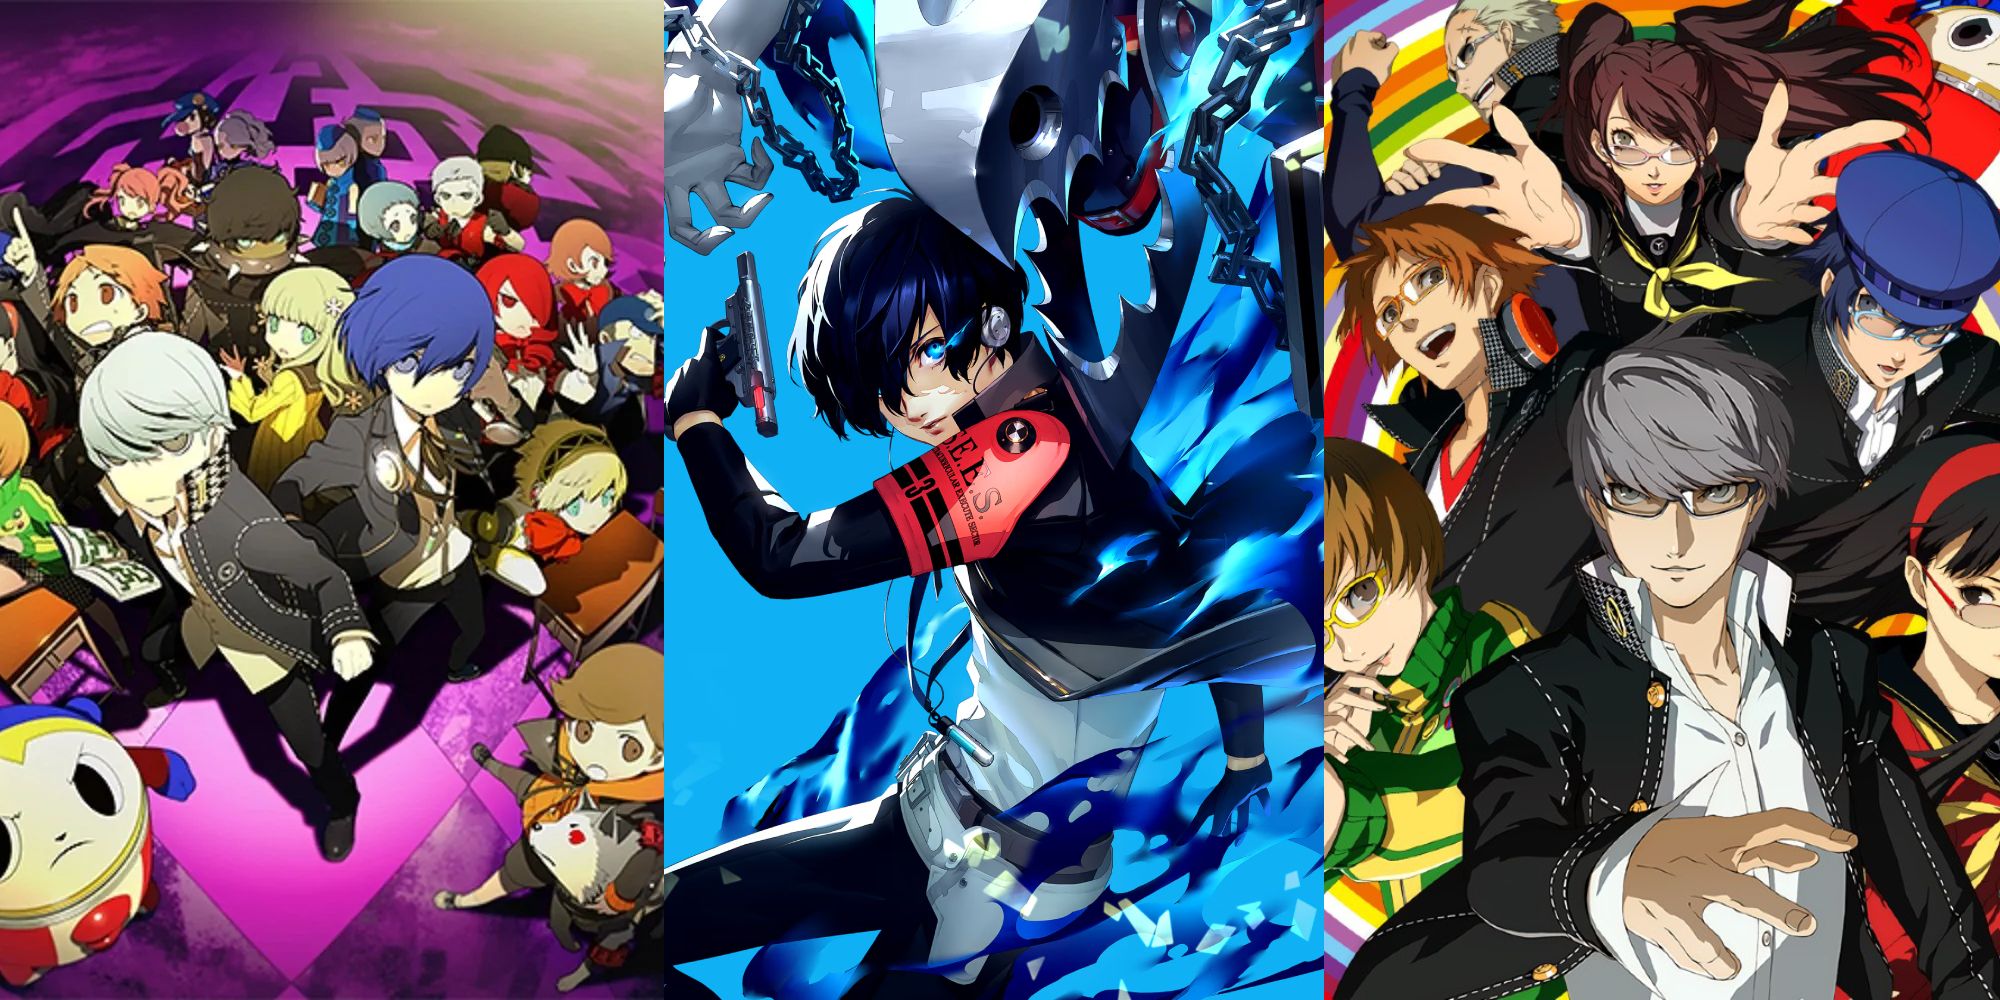 The cover art of three Persona games